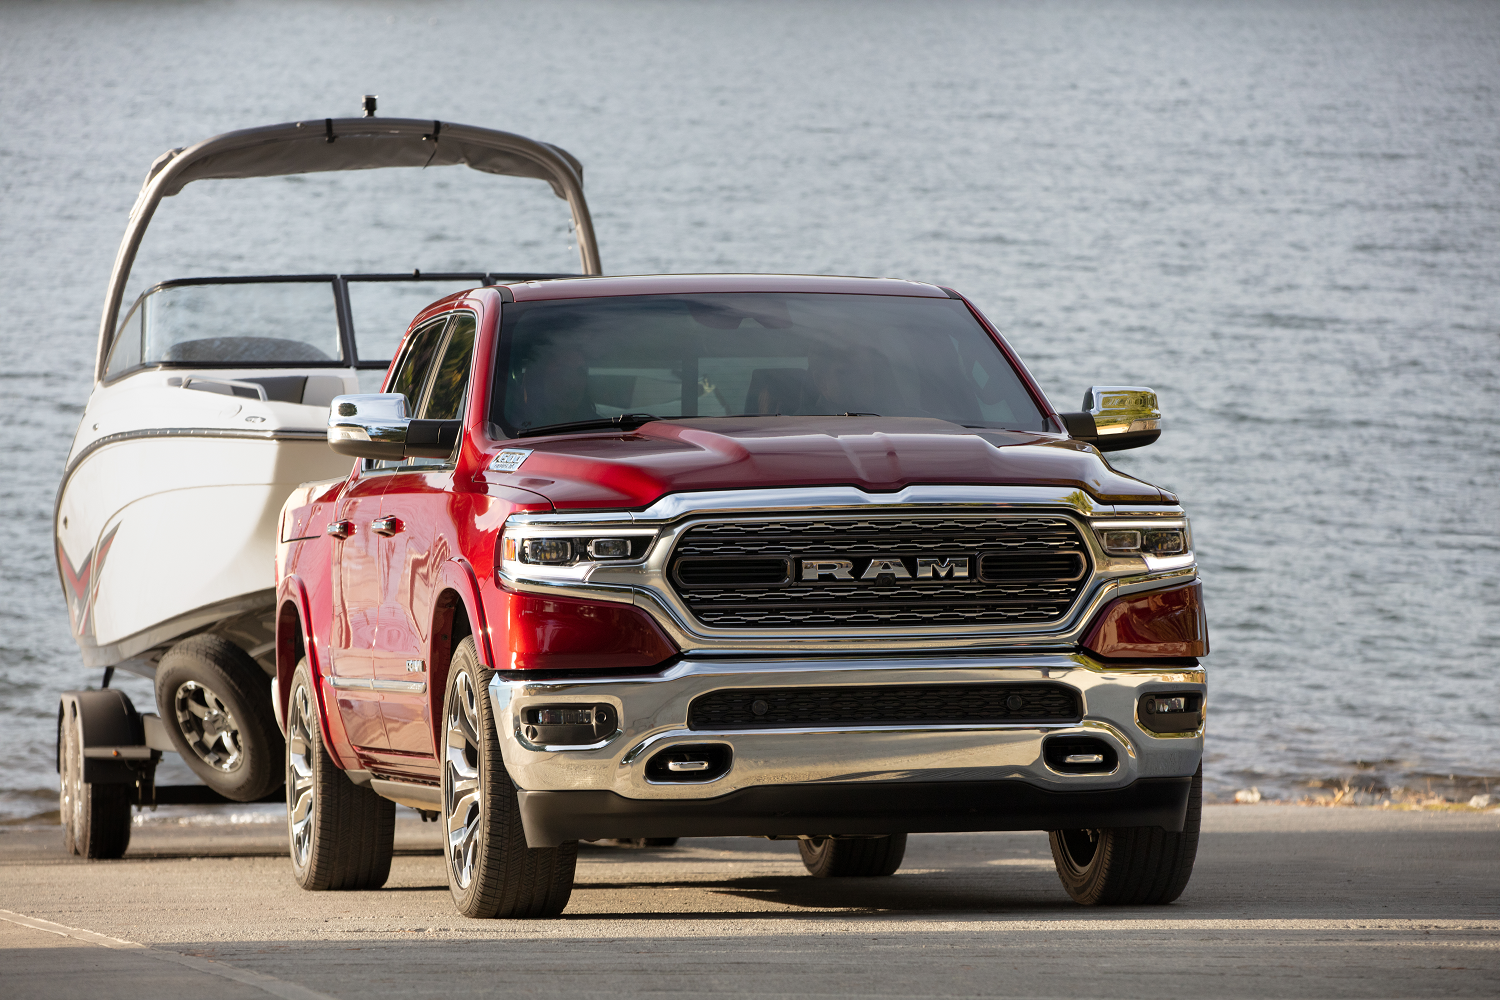 Used Ram trucks available near Cleveland, OH at Sliman's Sales & Service